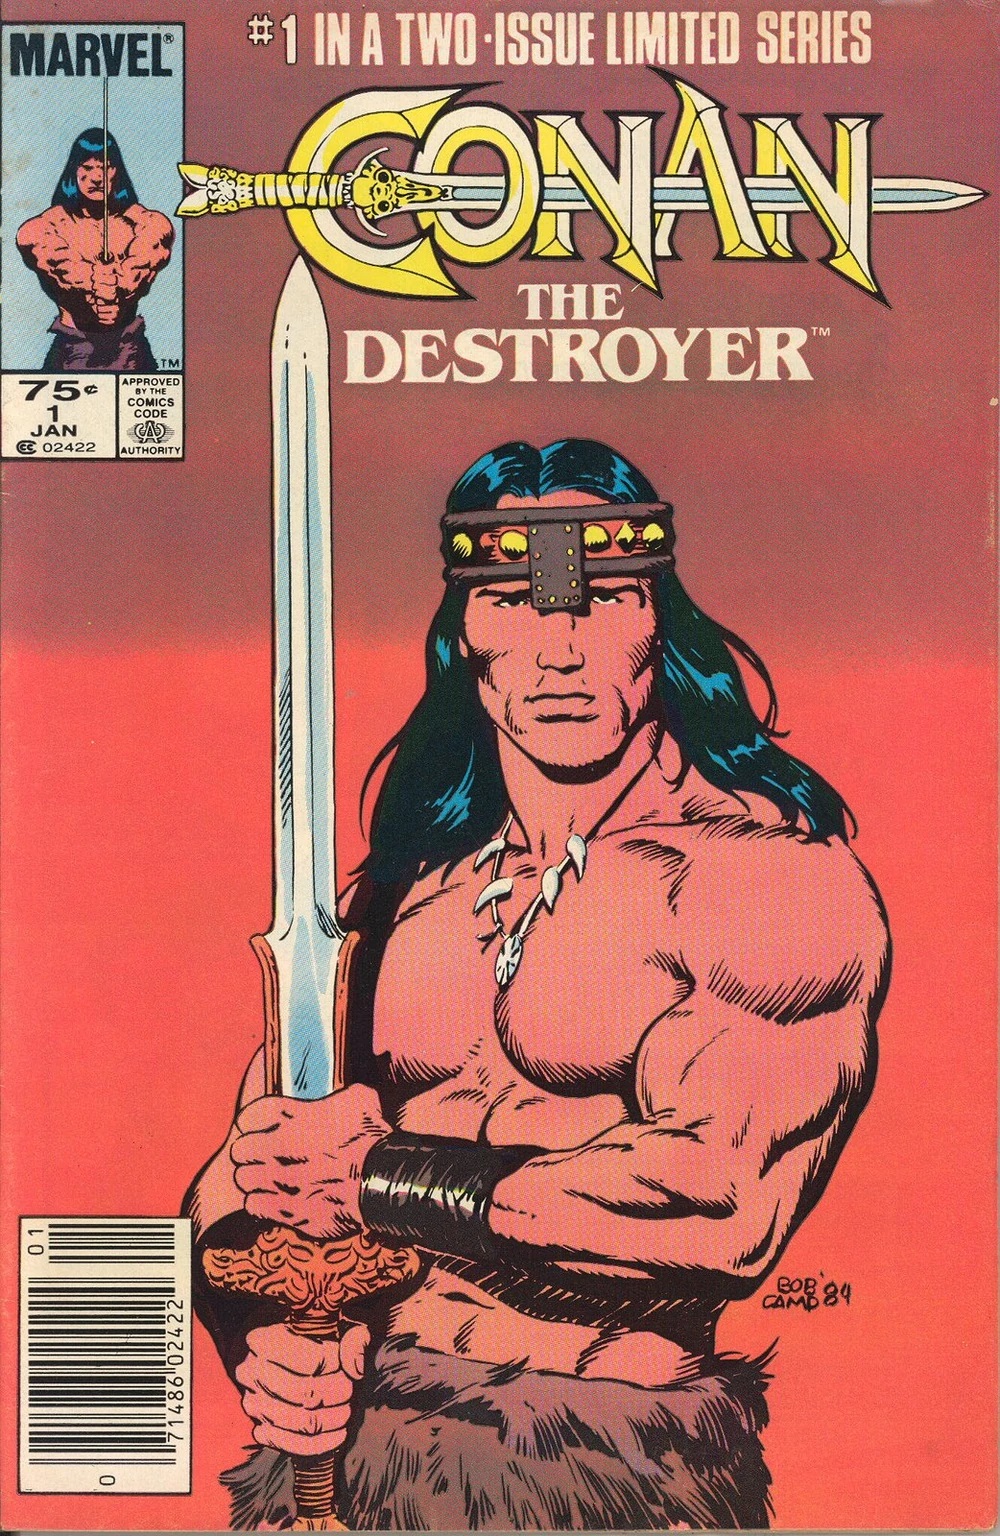 Conan The Destroyer: Movie Special Limited Series Bundle Issues 1-2